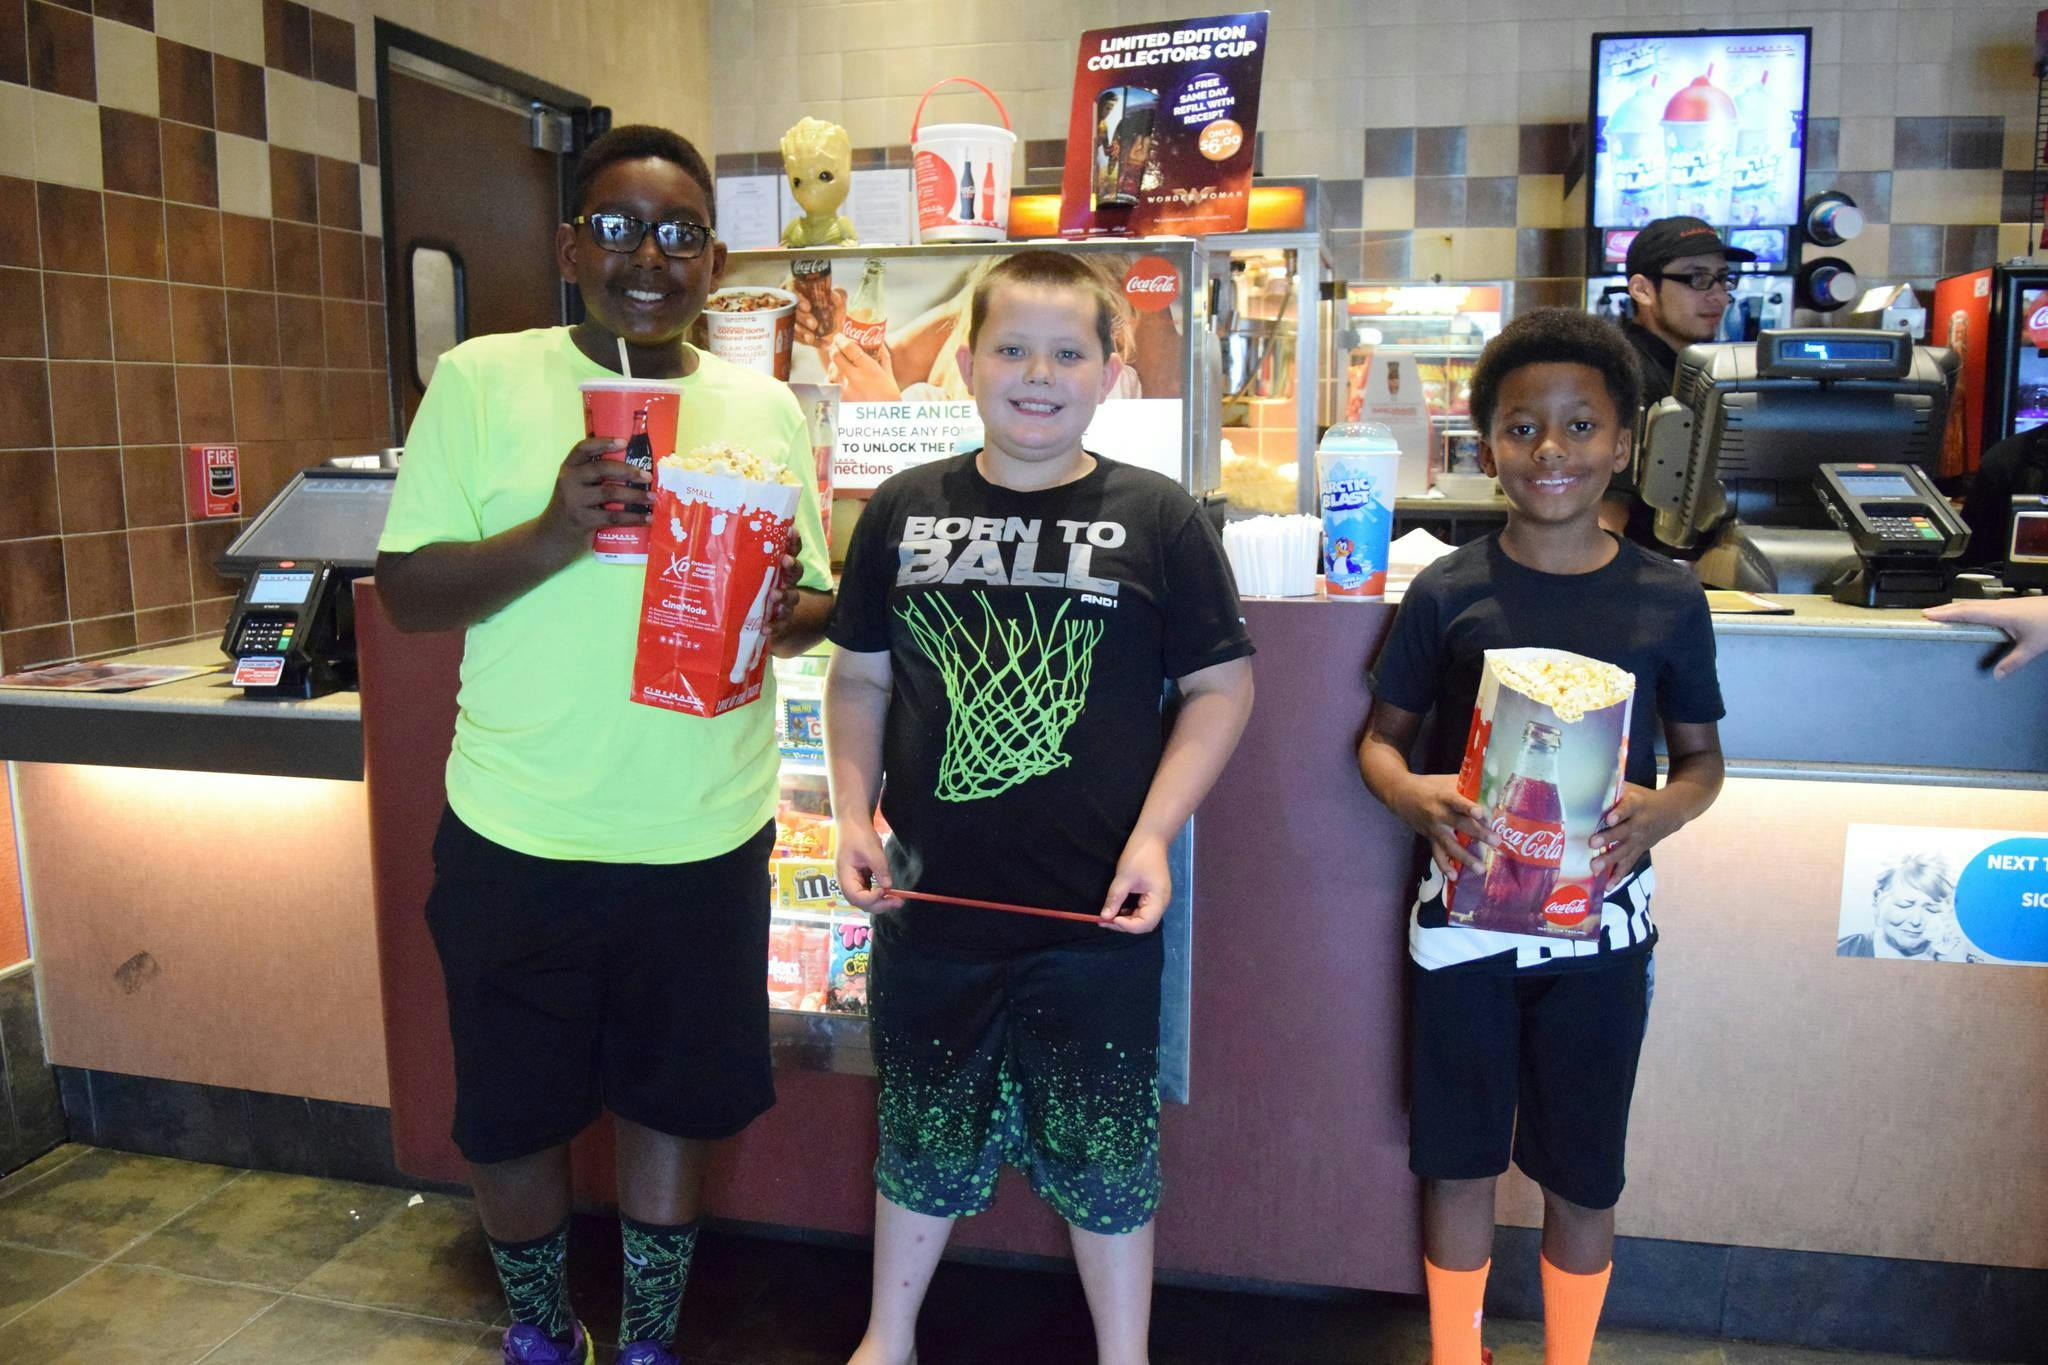 Three kids standing in front of a movie theater concession counter, holding bags of popcorn and drinks.